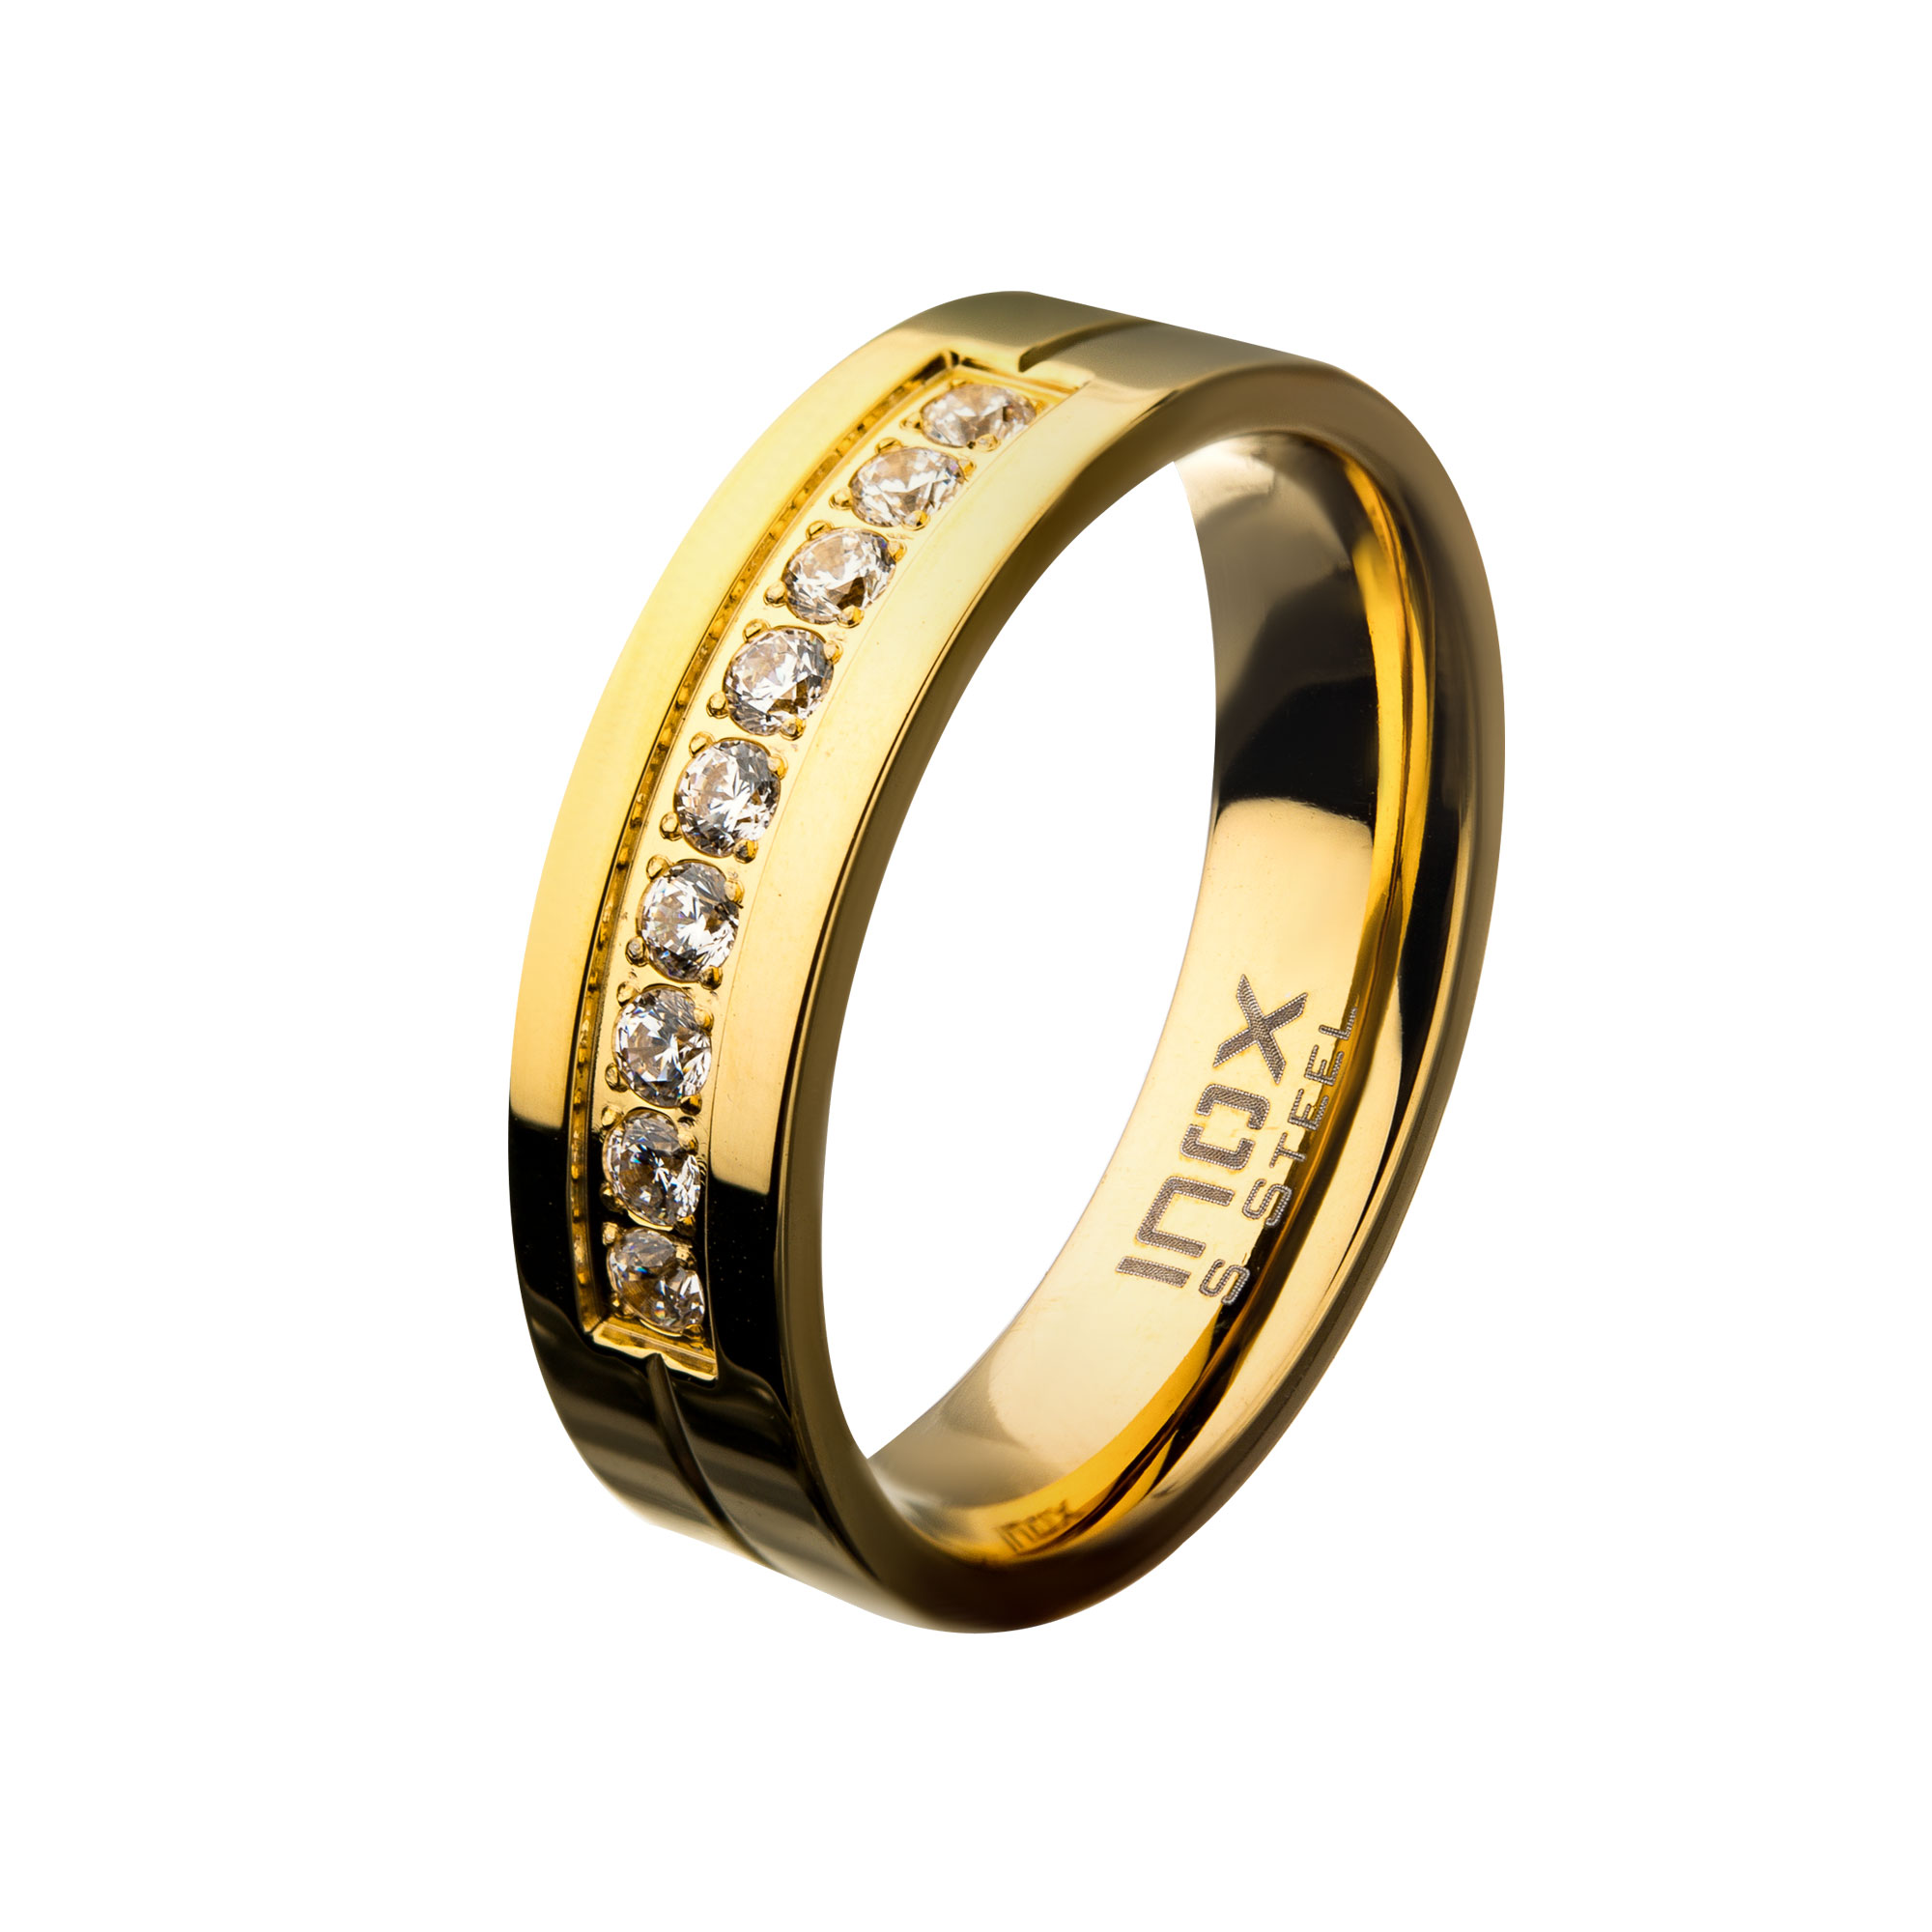 Gold PVD Plating Polished Steel ComfortFit Band with CZ's in Bead Channel Setting Ring Lewis Jewelers, Inc. Ansonia, CT